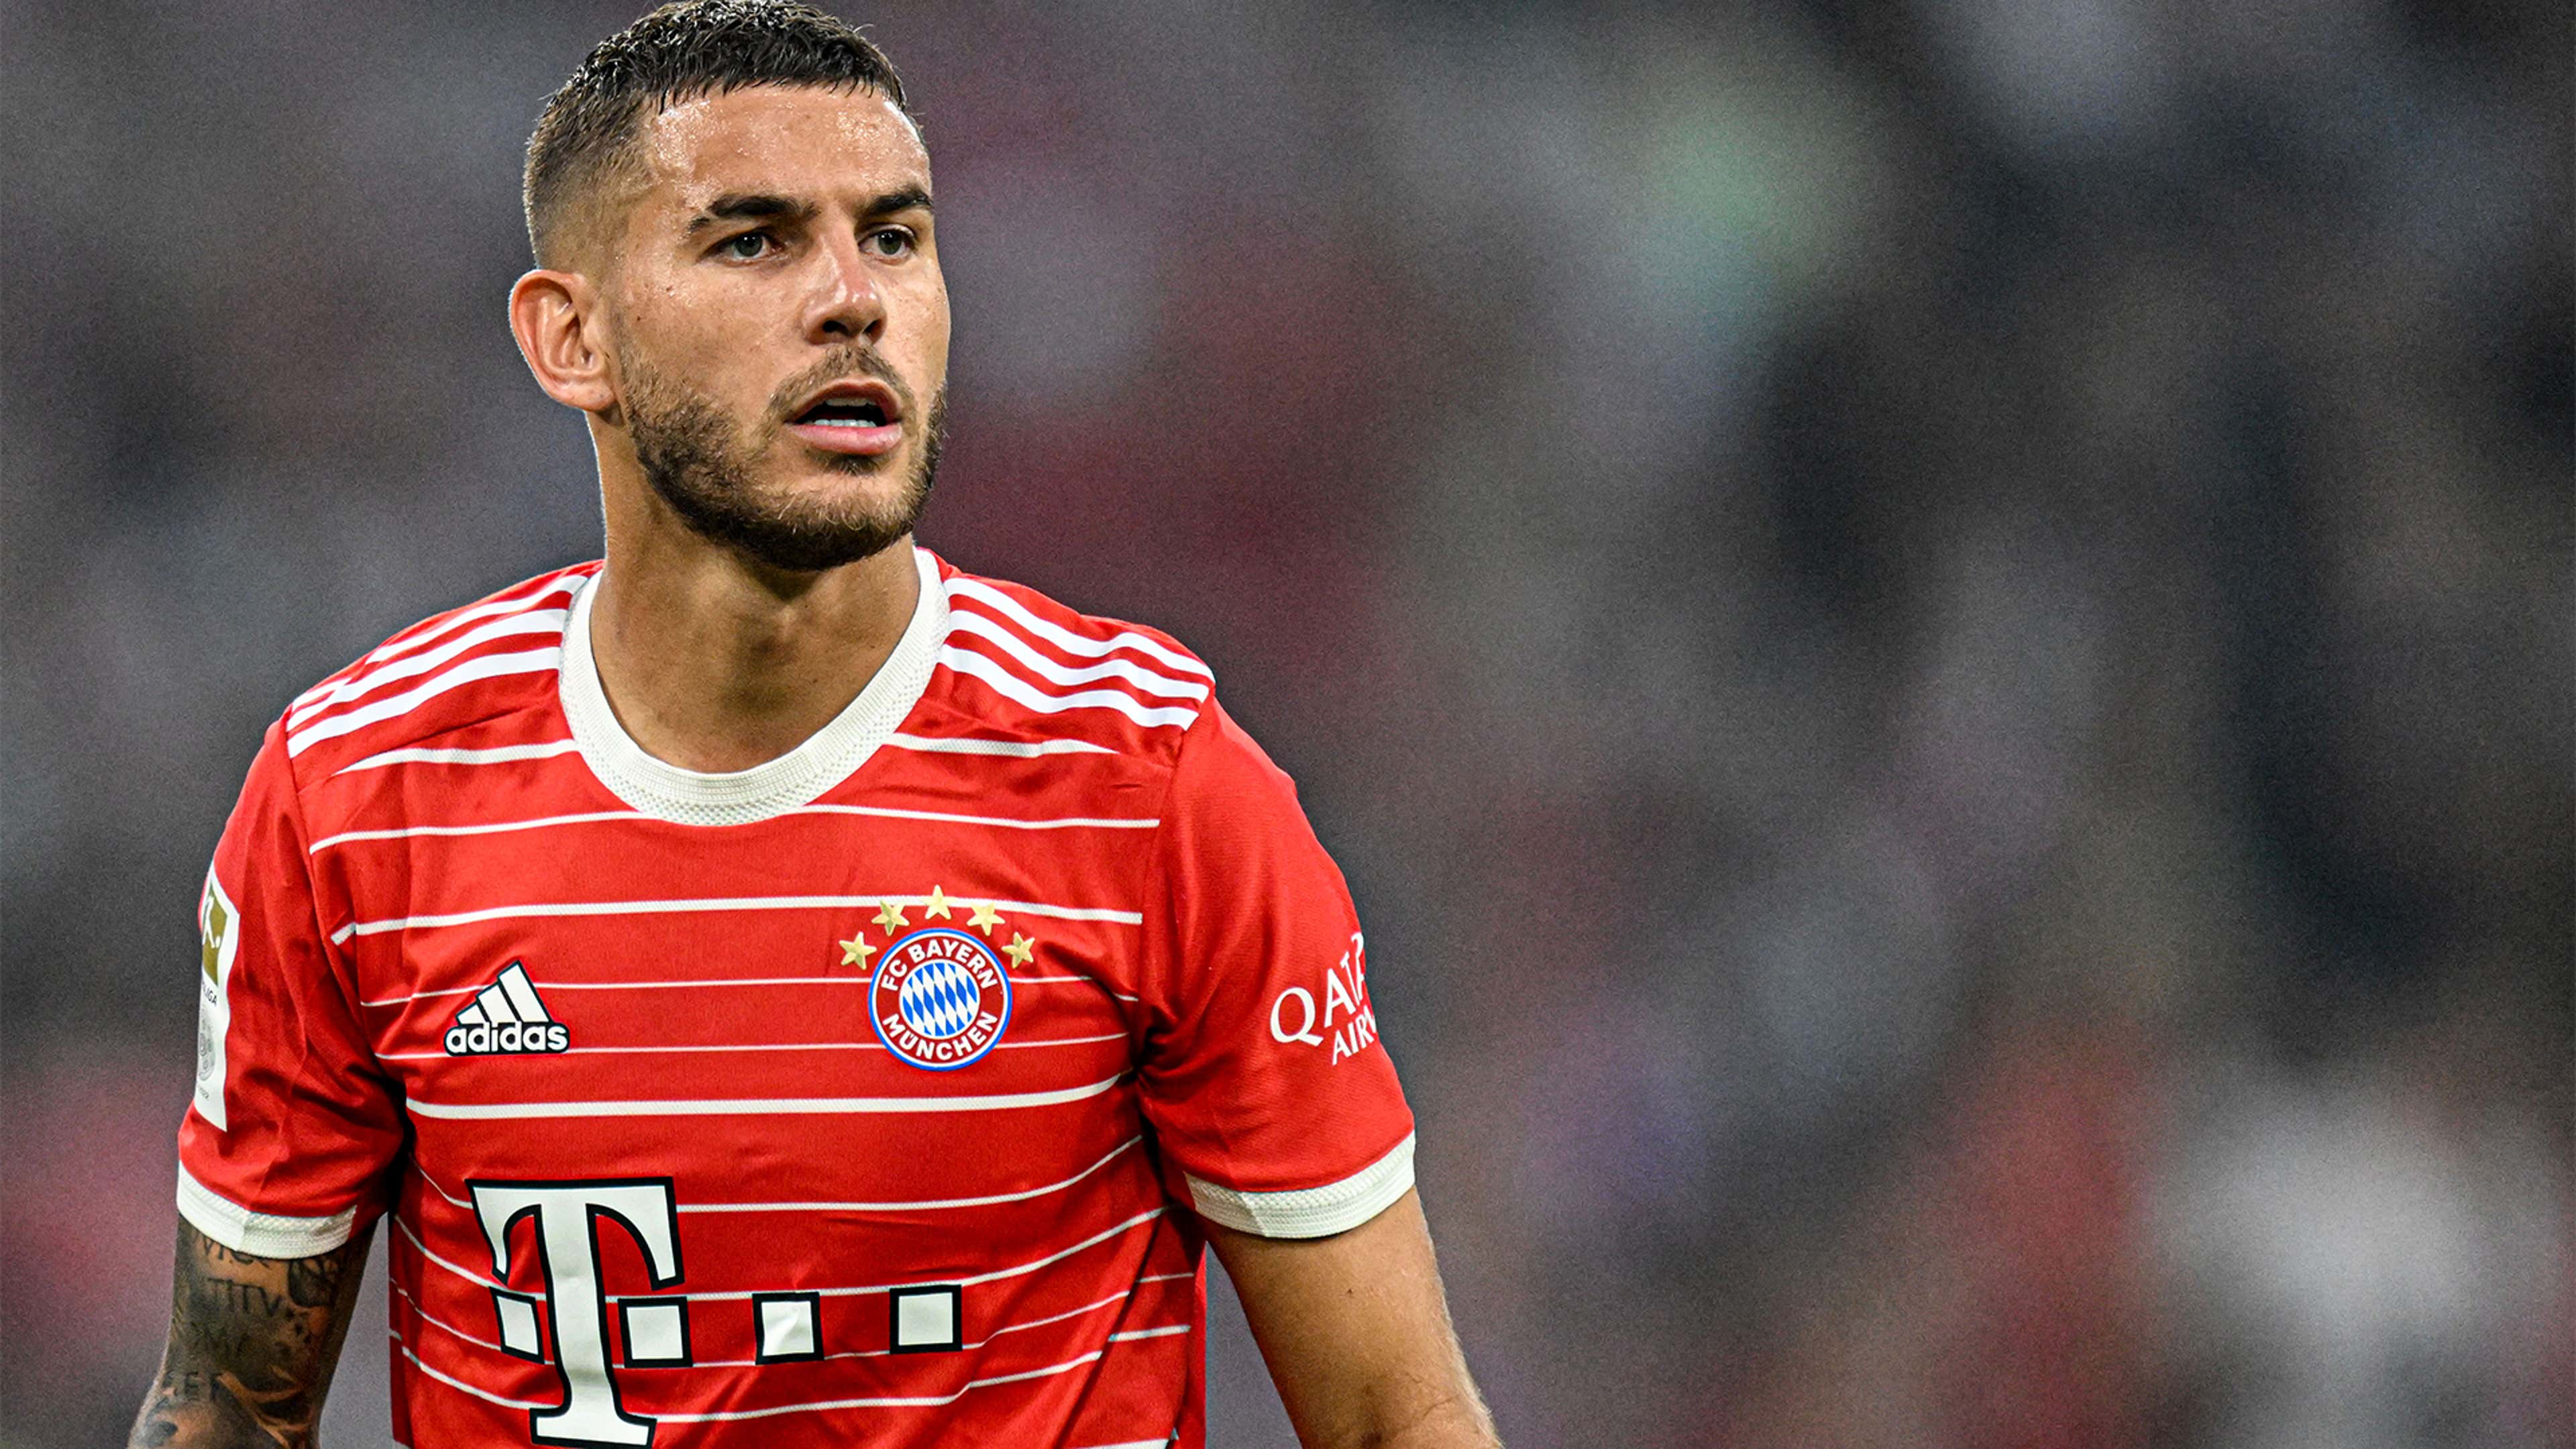 PSG line up another summer signing as Lucas Hernandez tells Bayern he wants to leave for Ligue 1 champions - with €60 million fee set | Goal.com